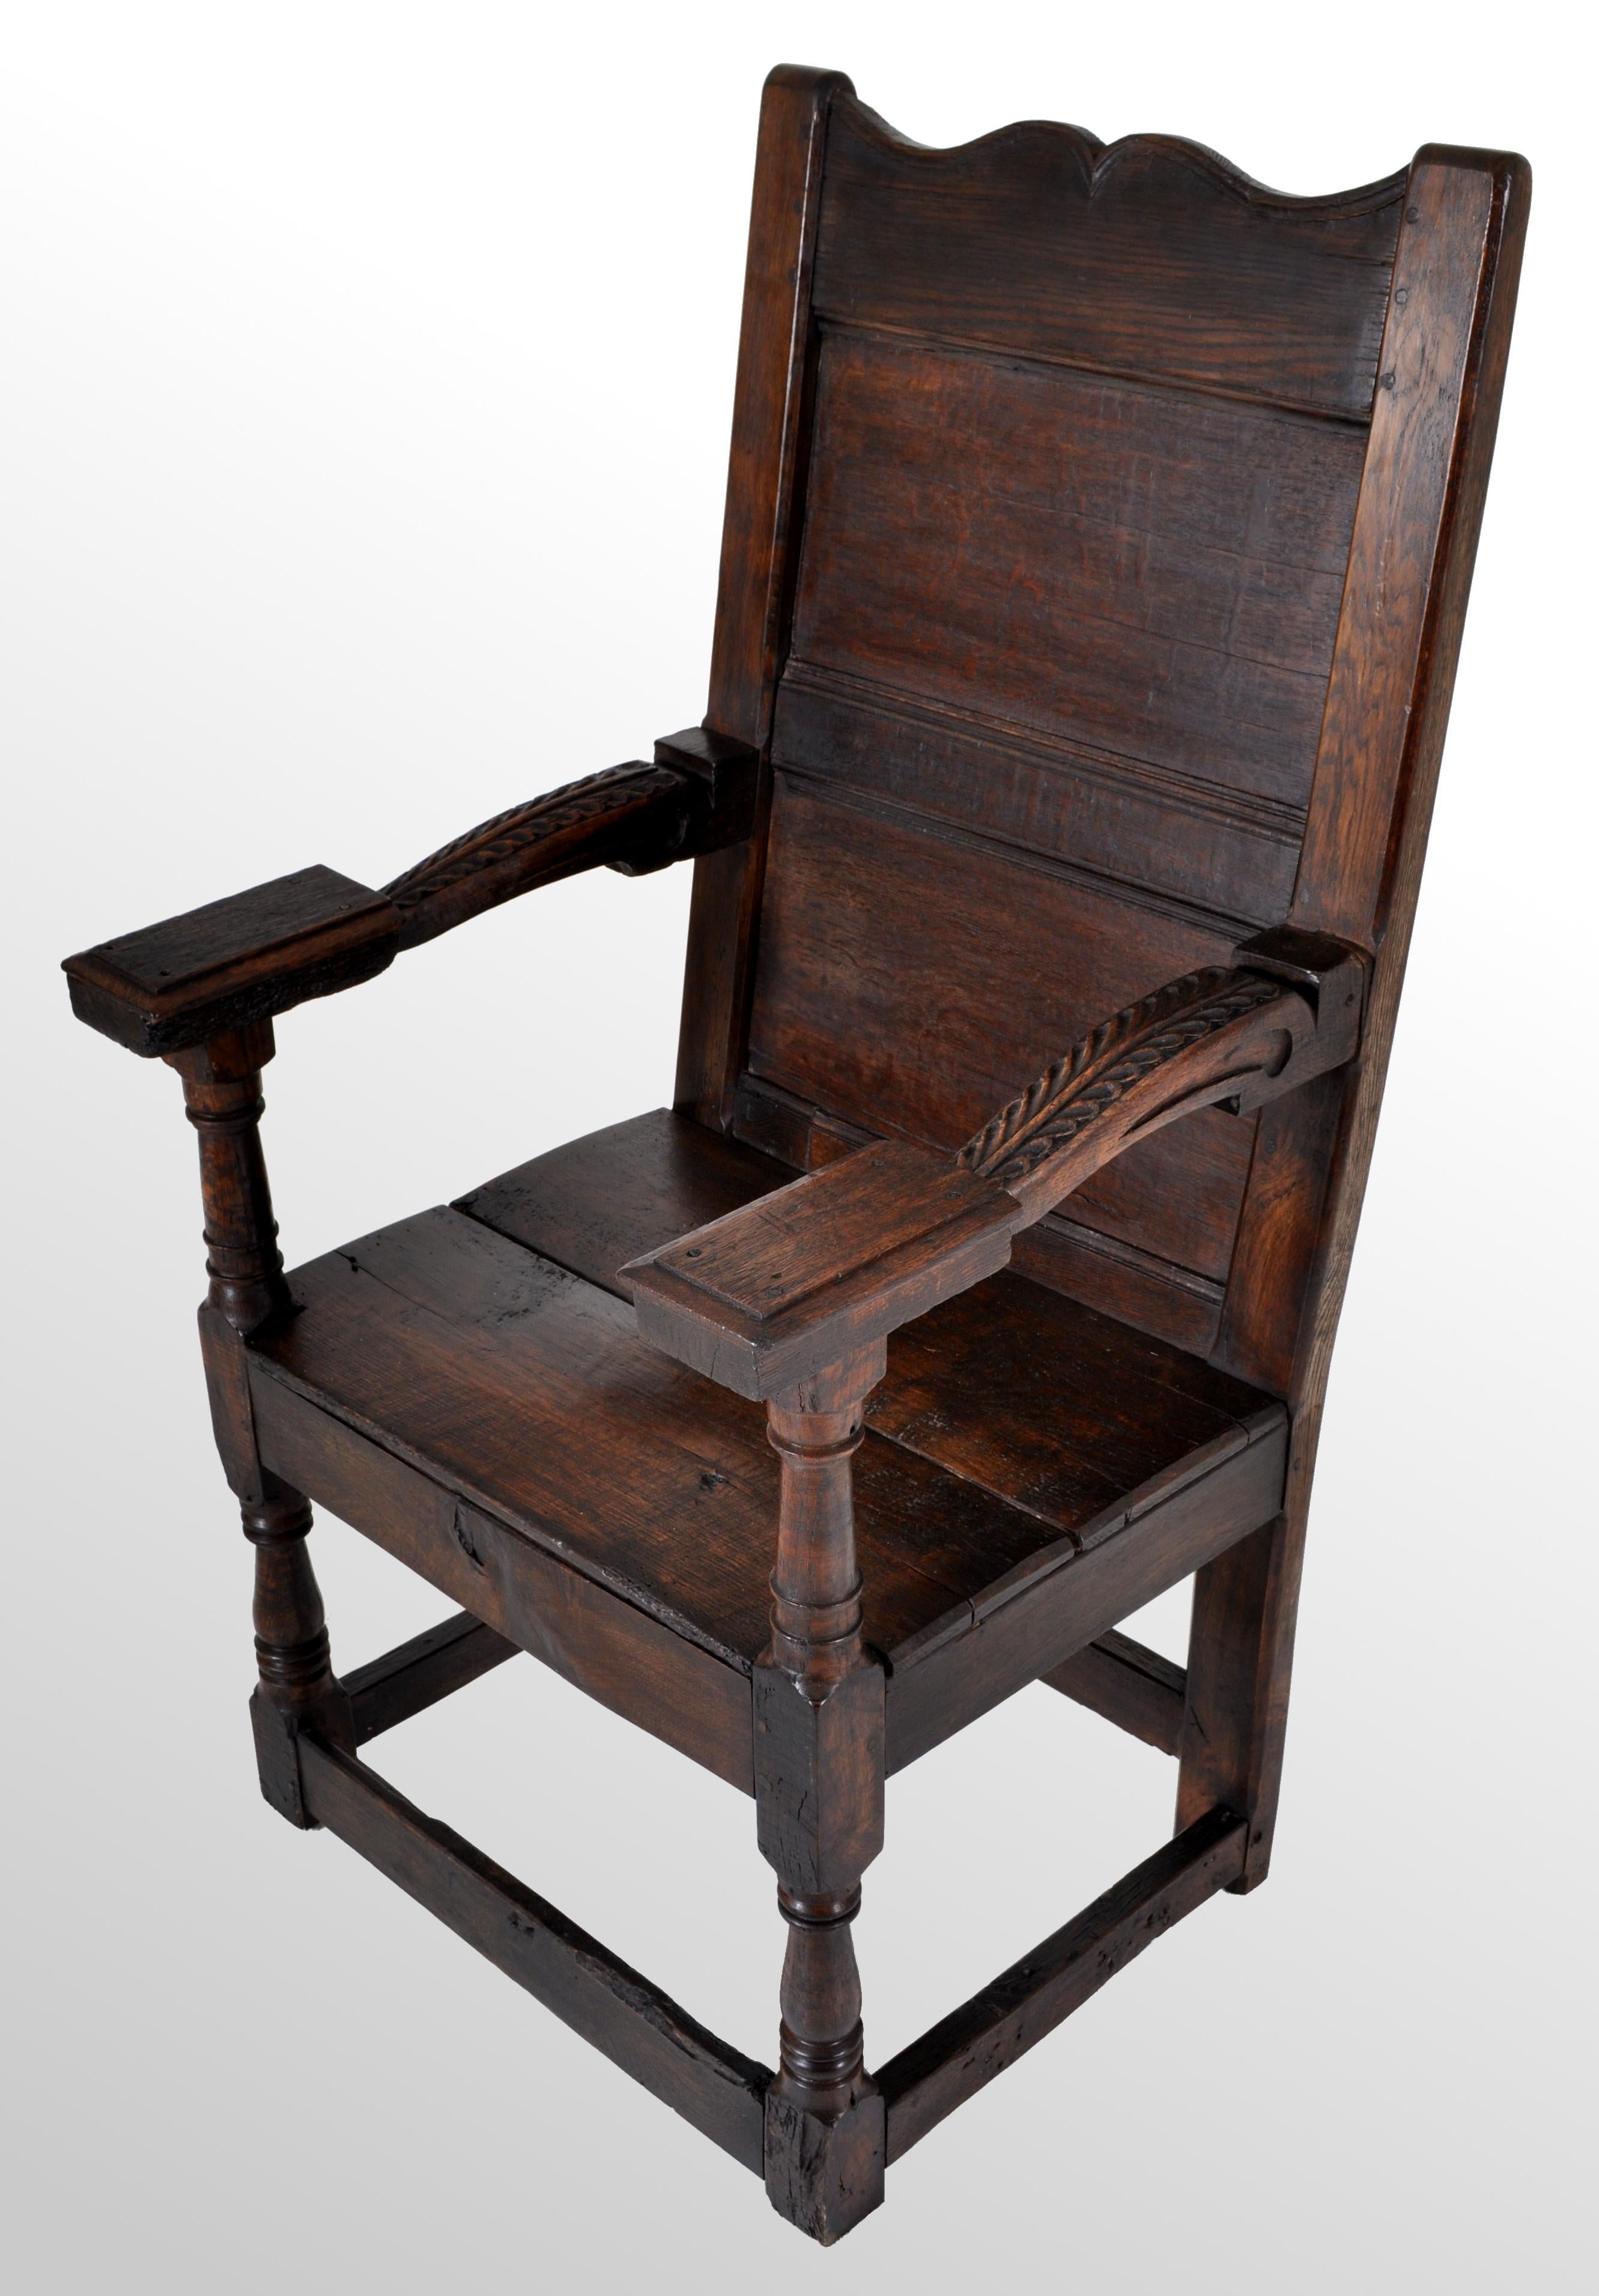 The chair of joined & pegged construction, having a shaped & paneled back, the arms carved & having turned supports. The chair having a simple planked seat and raised of turned legs, the chair having a stretcher on each side. The chair unusually has